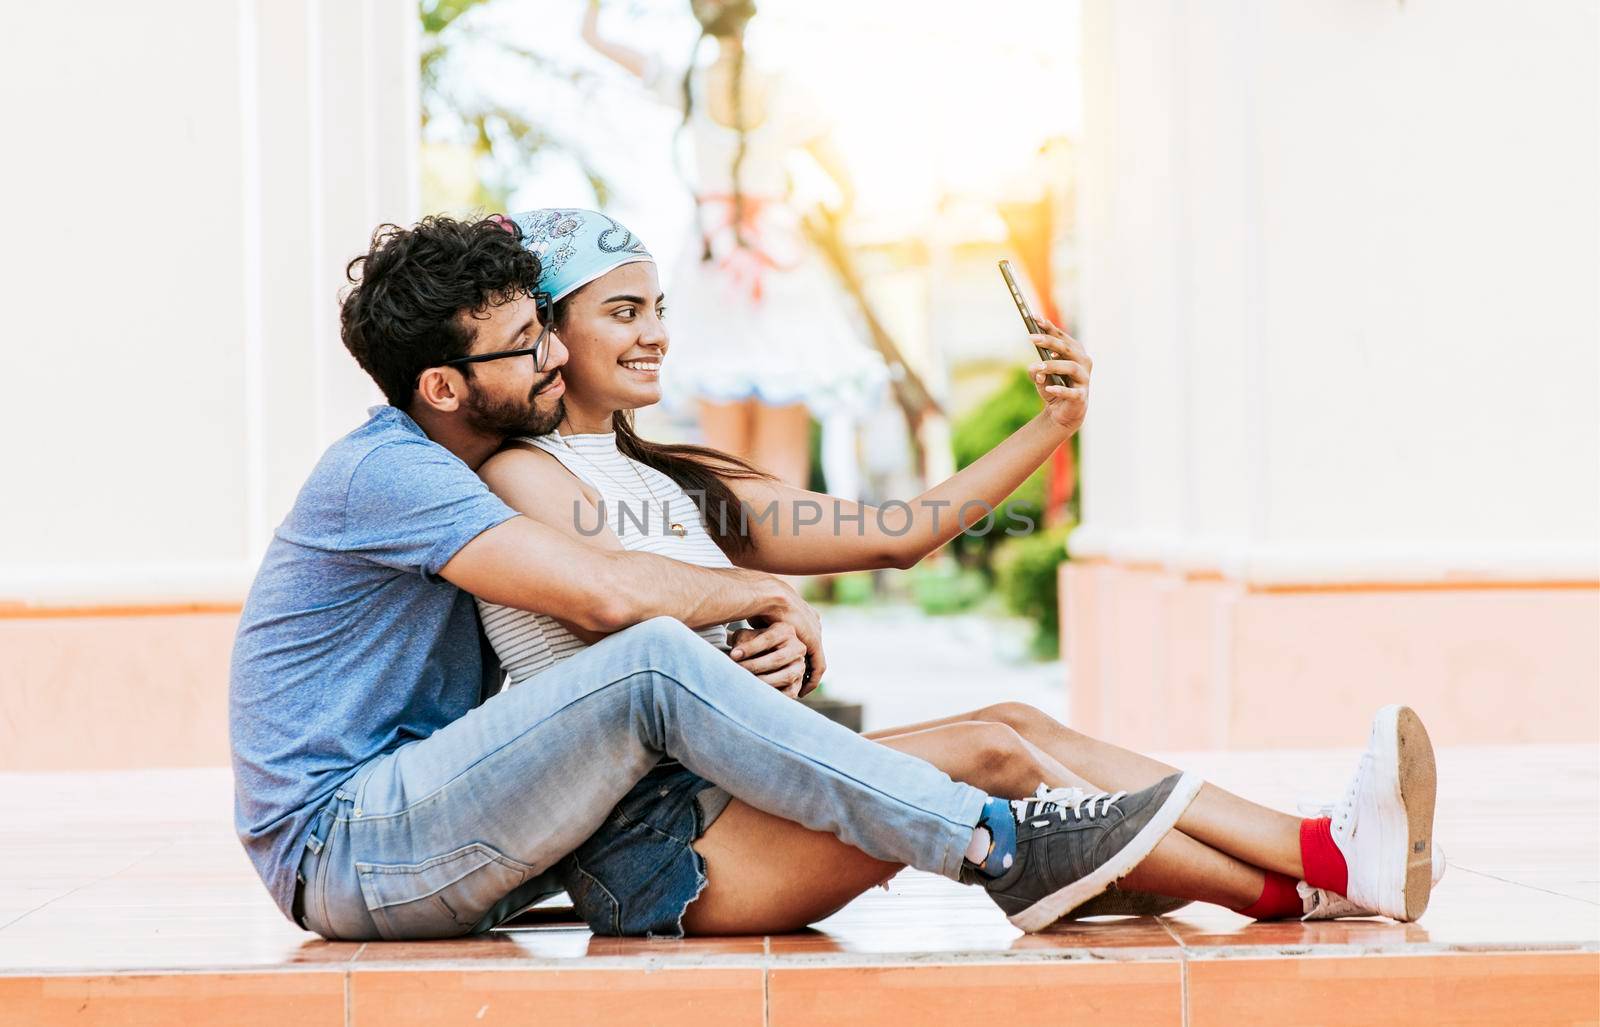 Young couple taking a selfie sitting on the floor. Young latin couple in love sitting on the floor taking a selfie outdoors. Concept of happy couple taking photos with the cell phone